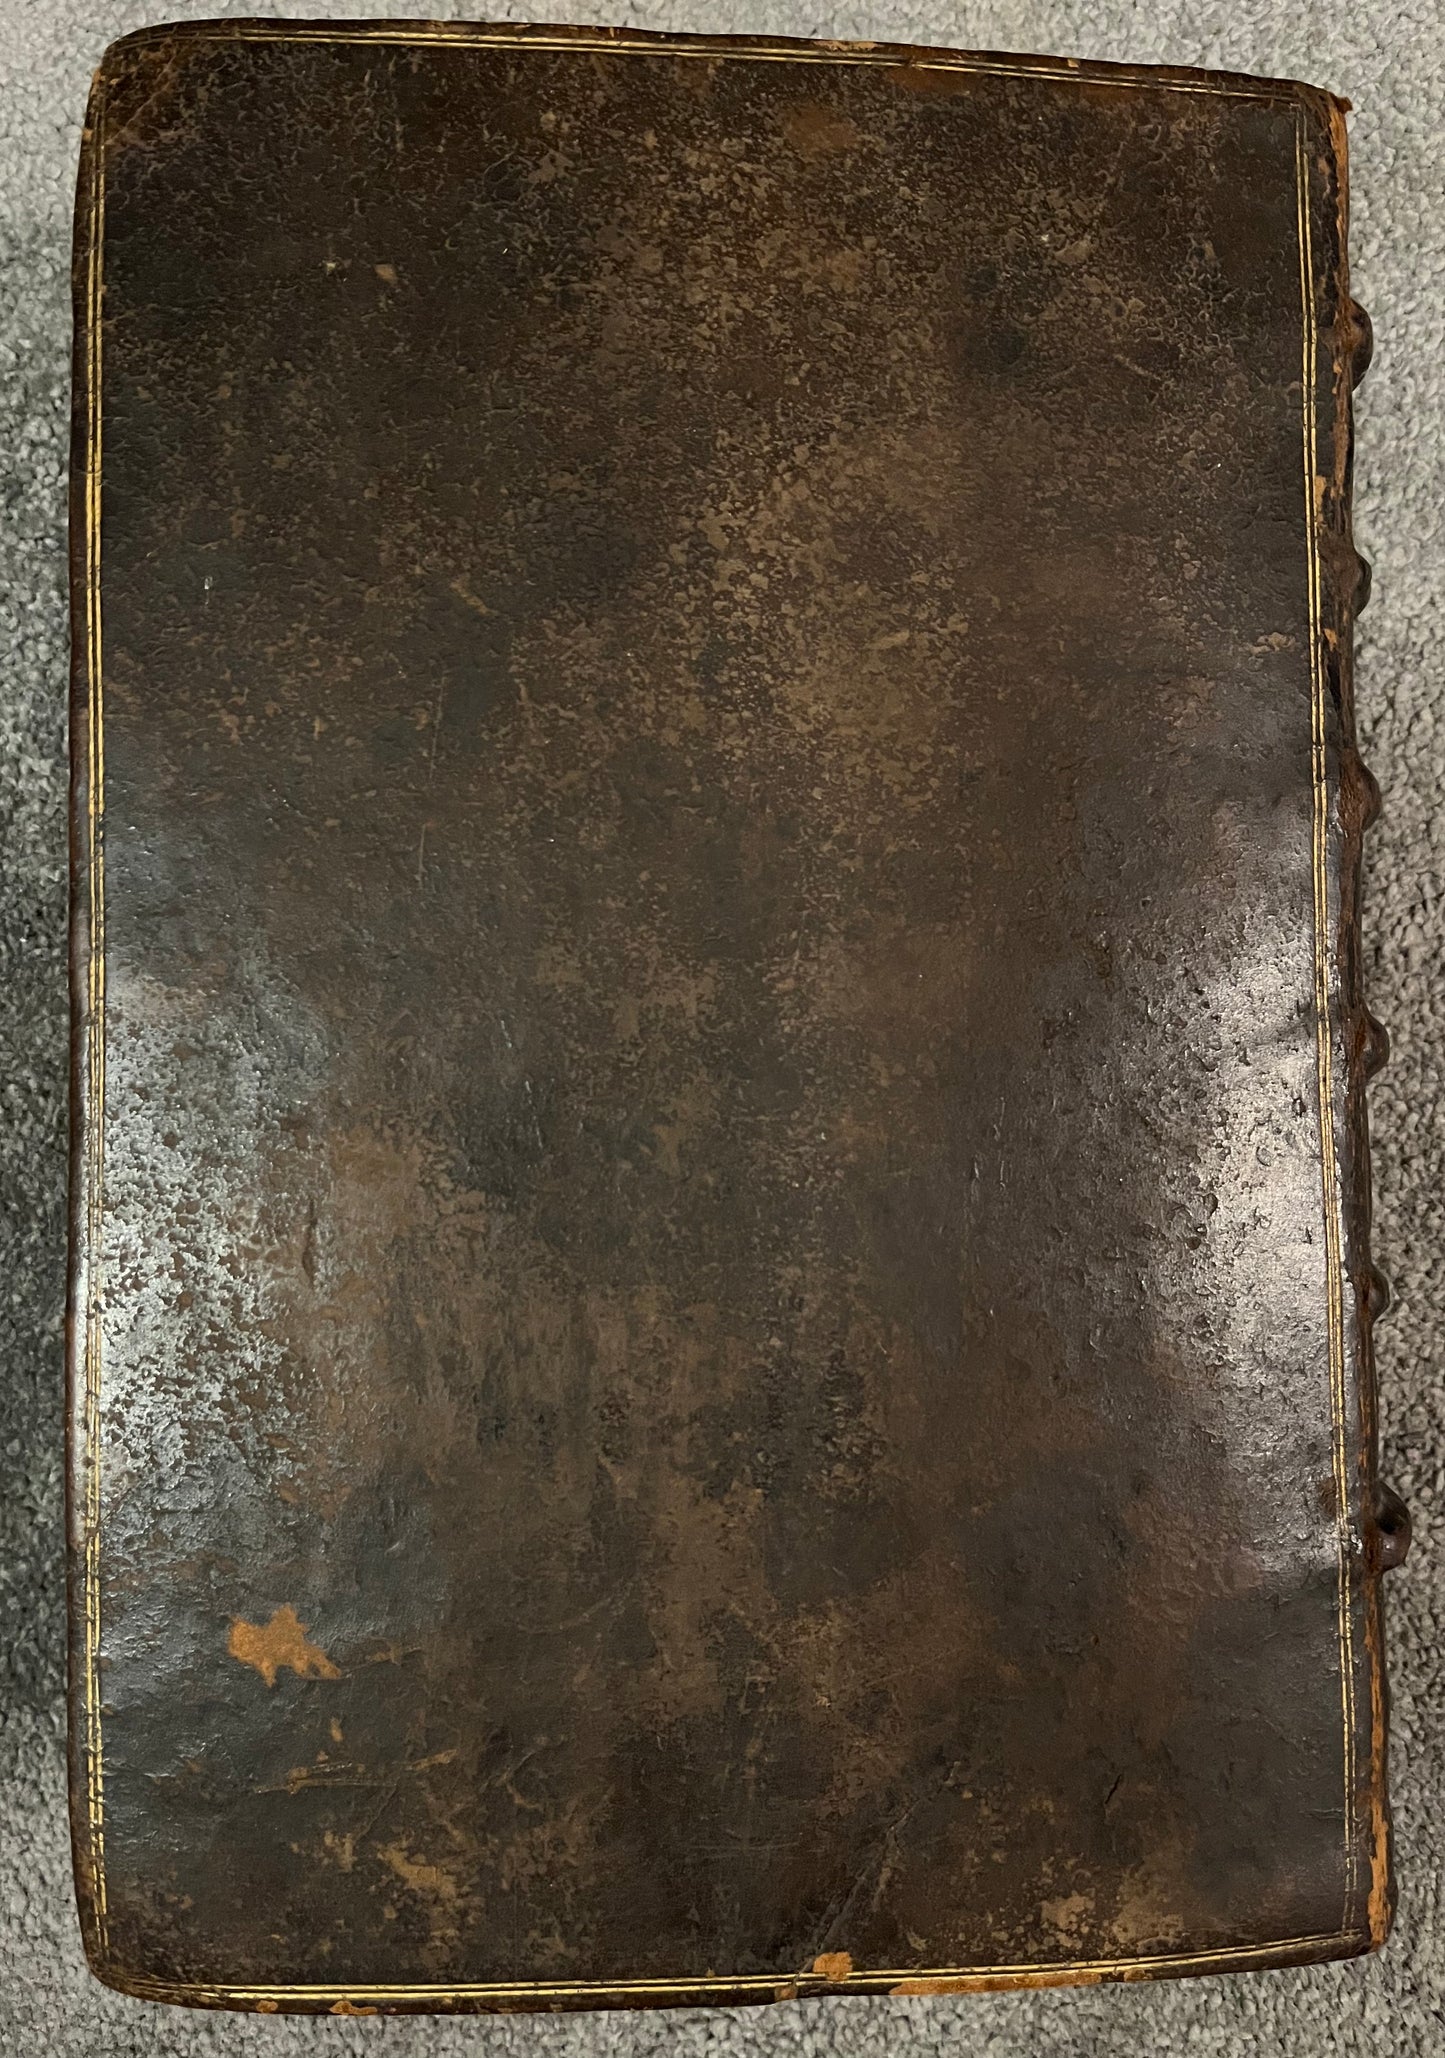 First French - English Dictionary in Original Binding - 1611 - Cotgrave's "A Dictionarie of the French and English Tongues"